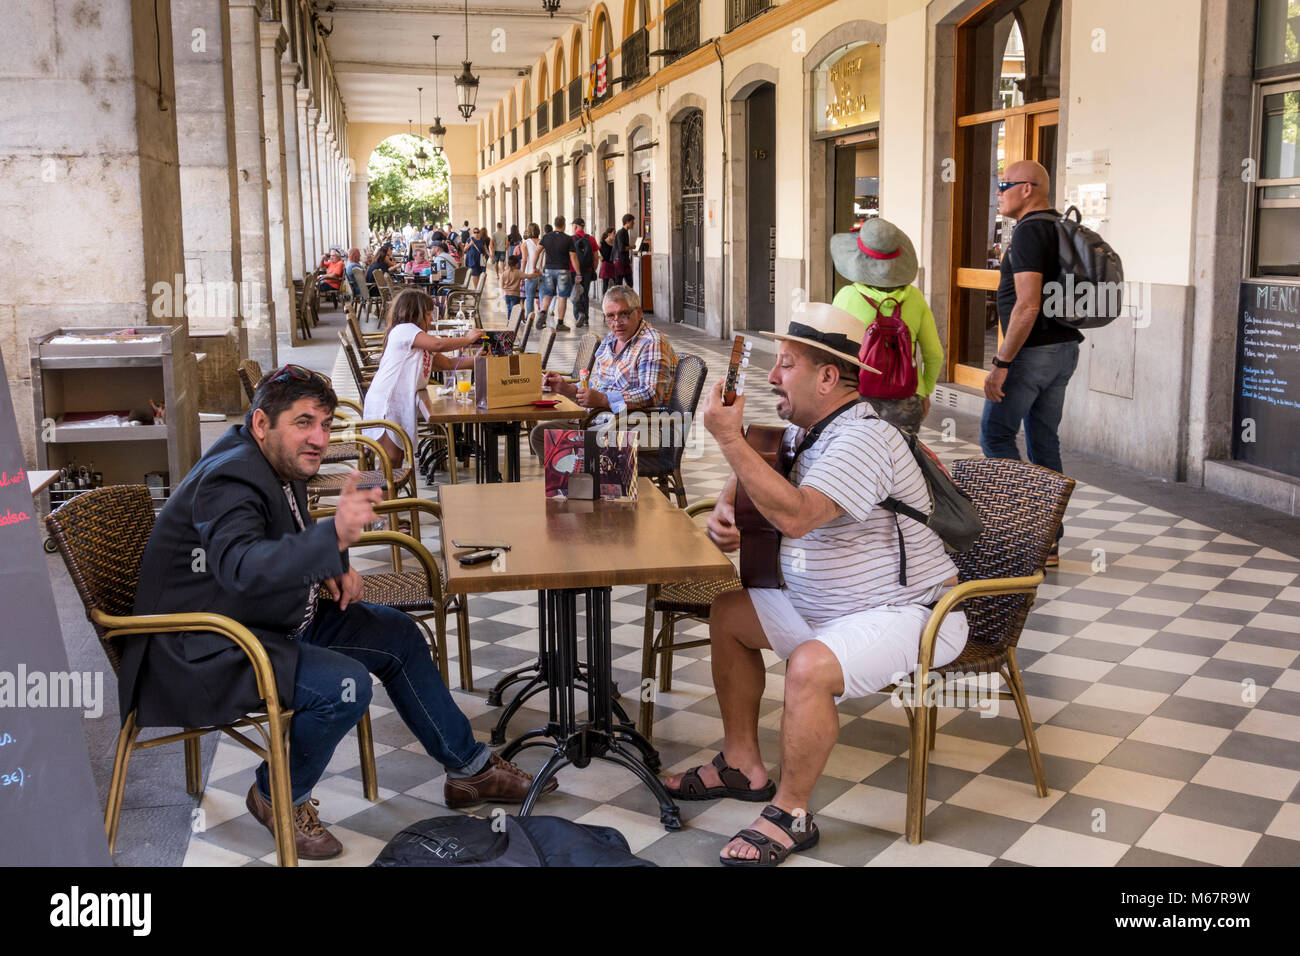 Middle age man playing guitar and singing in pavement cafe, Placa de la Independencia, Girona, Catalonia, Spain Stock Photo